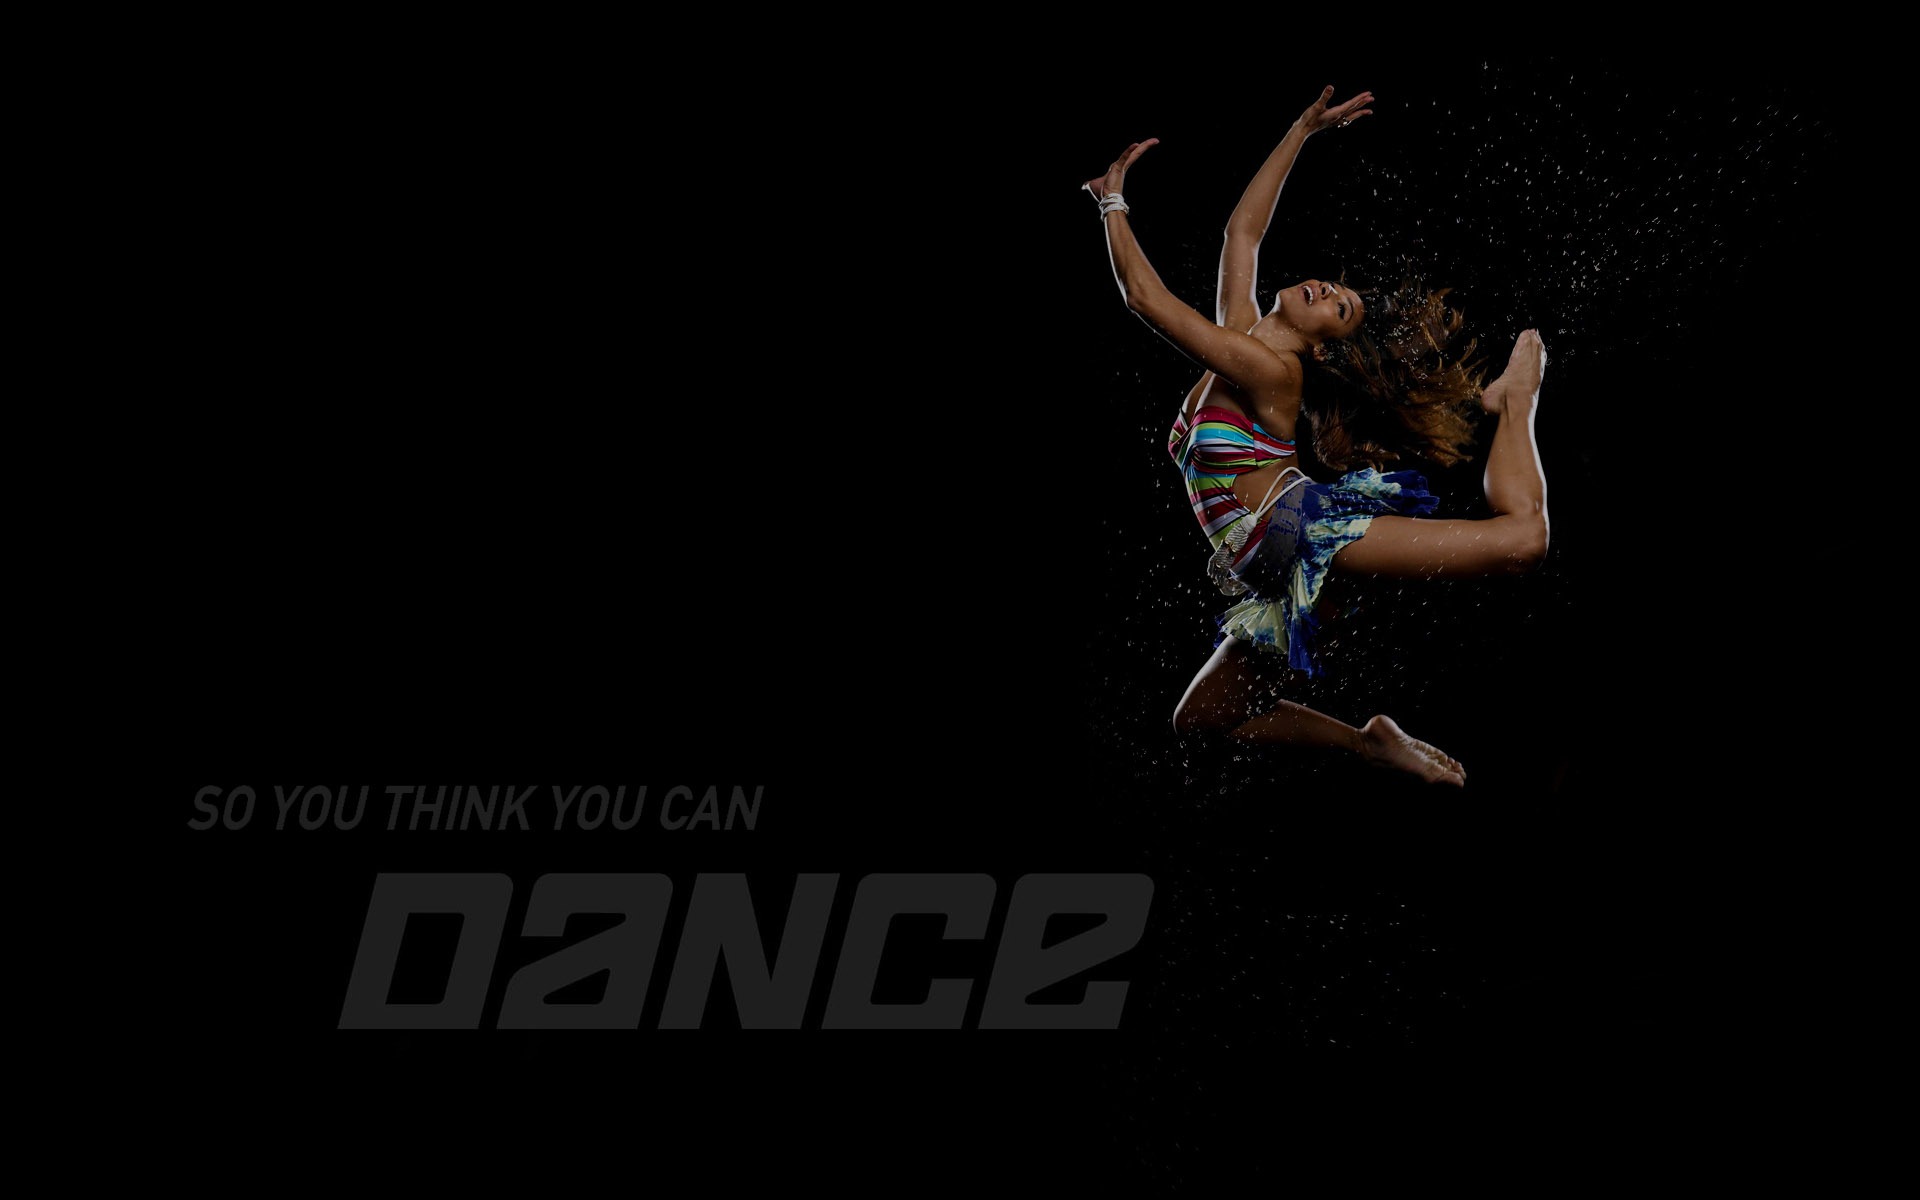 So You Think You Can Dance 舞林爭霸壁紙(二) #17 - 1920x1200